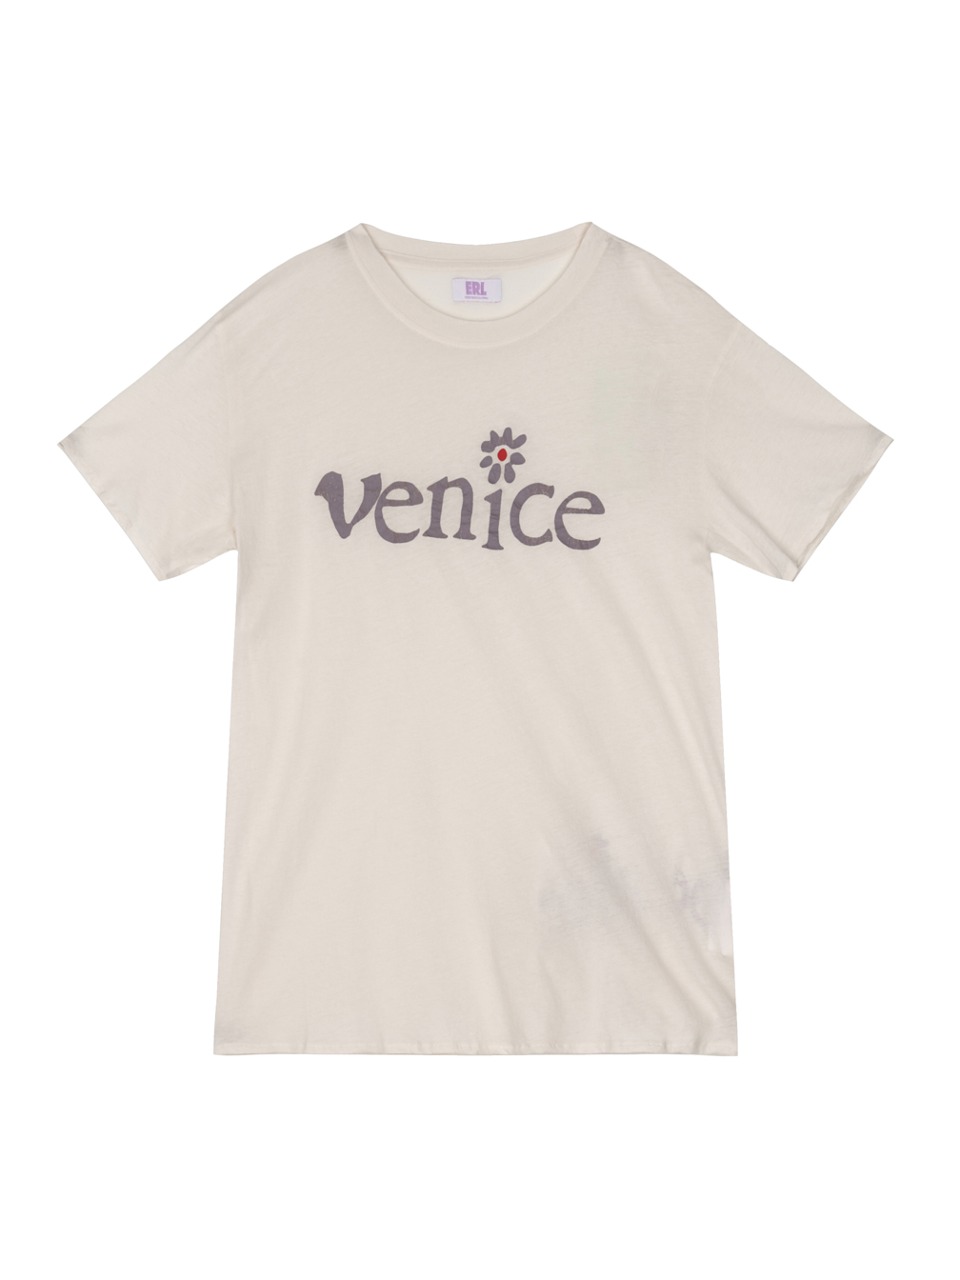 ERL - VENICE PRINTED COTTON T SHIRT (WHITE)